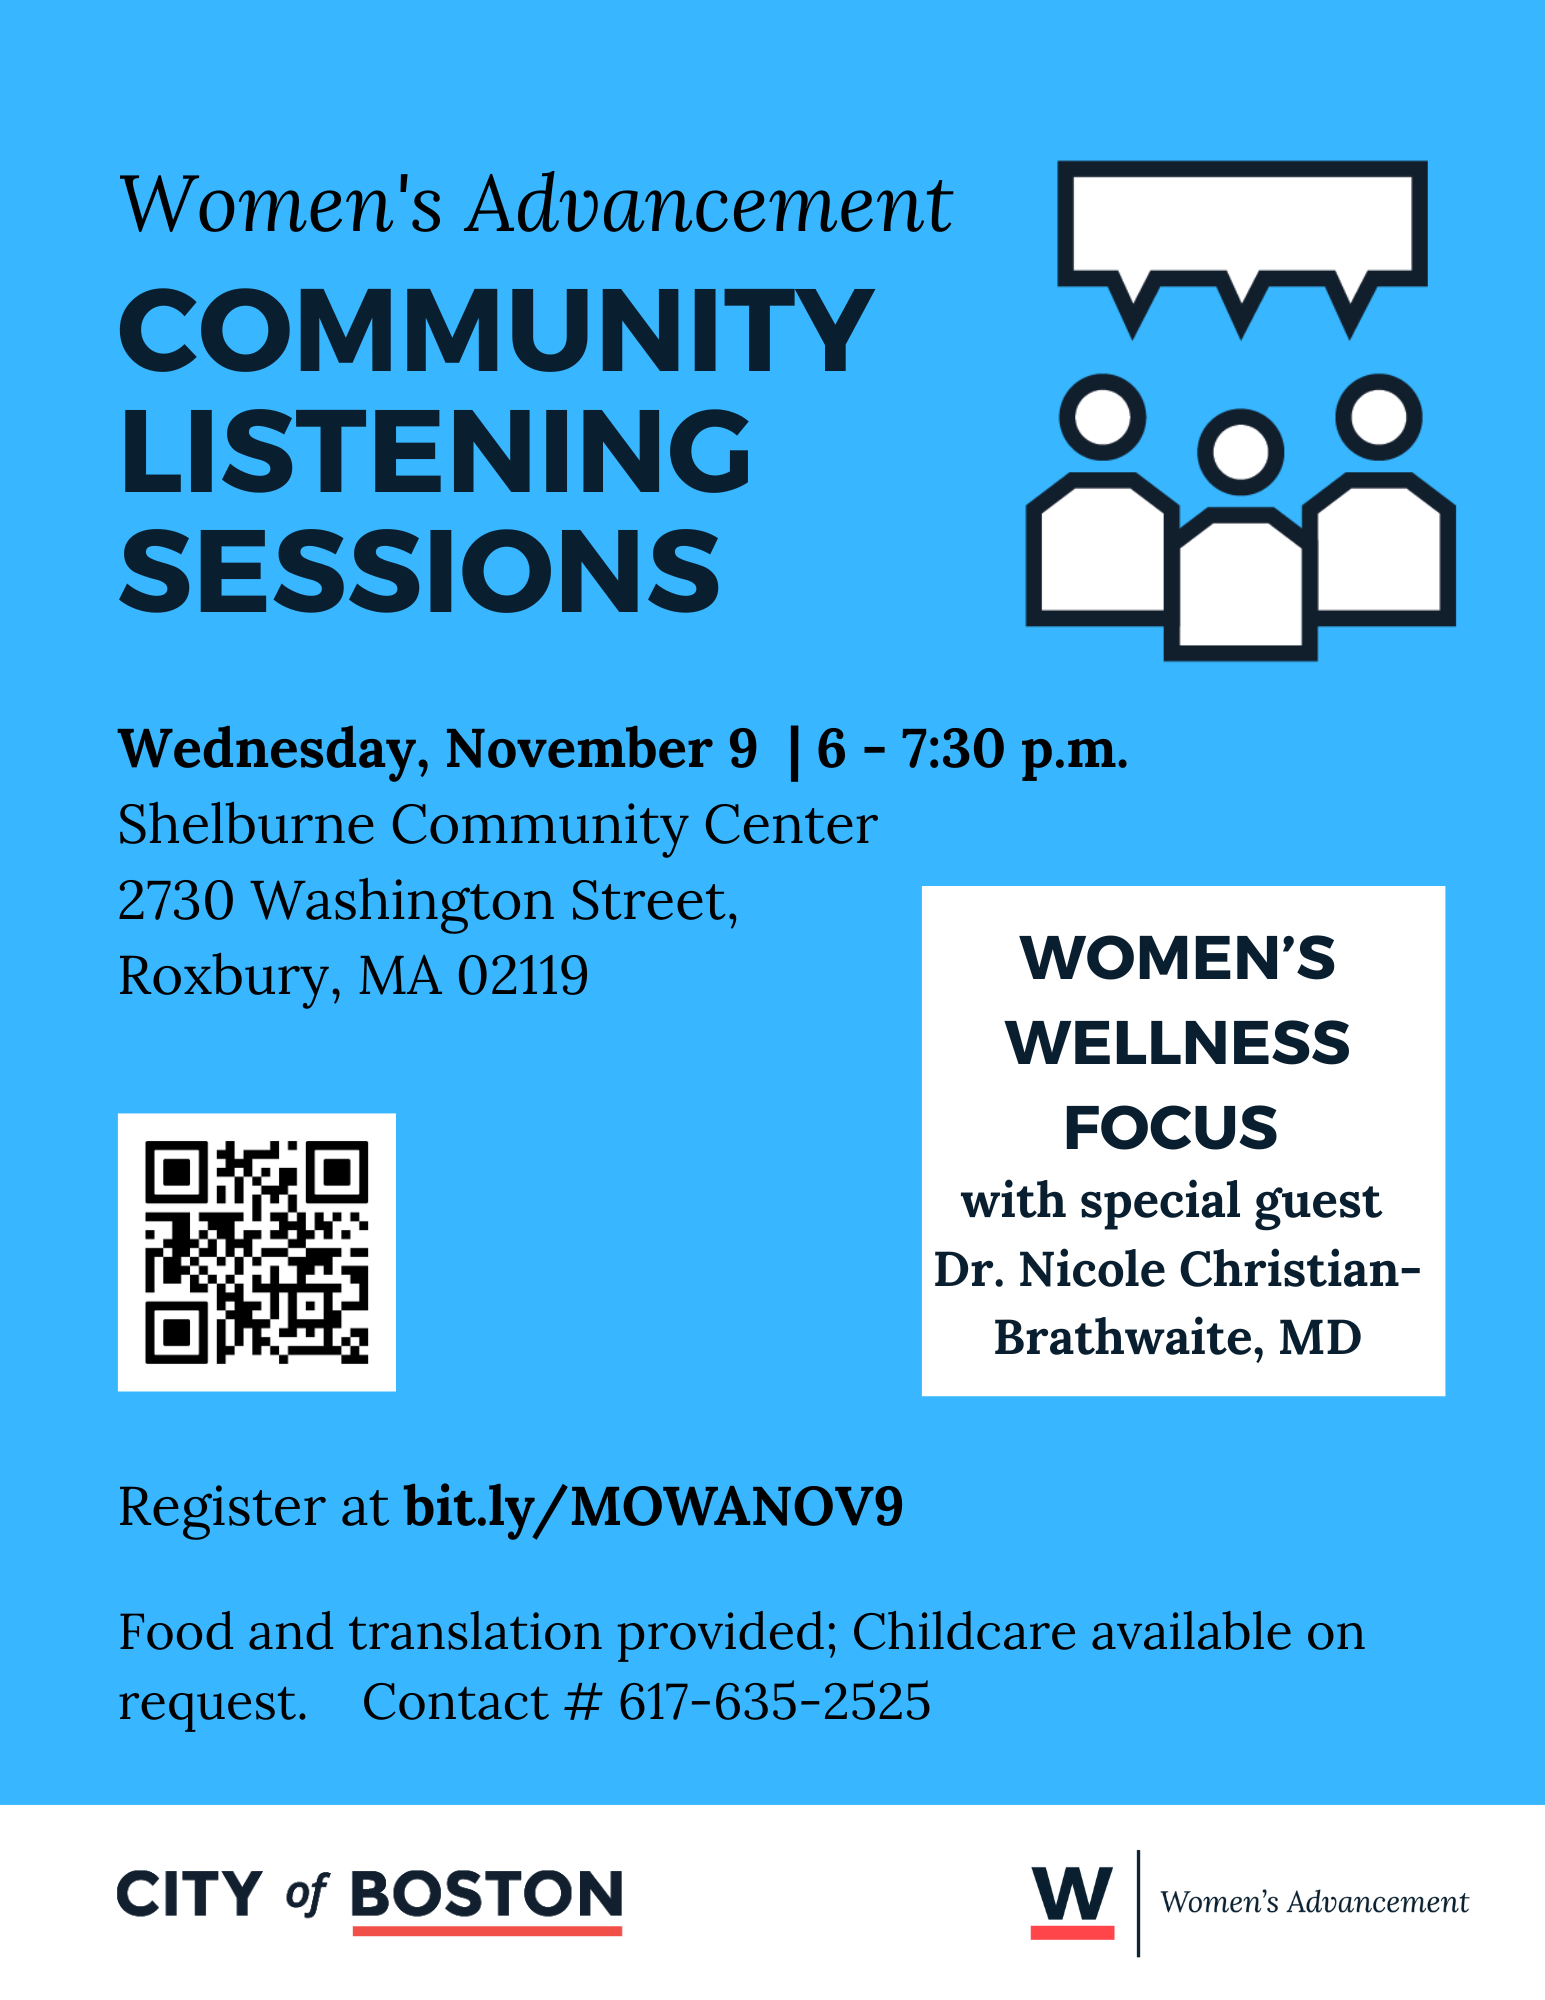 Blue image. Text: Office of Women’s Advancement Community Listening Sessions. Wednesday, November 9  | 6 - 7:30 p.m.        Shelburne Community Center 2730 Washington Street,  Roxbury, MA 02119 WOMEN’S WELLNESS FOCUS  with special guest  Dr. Nicole Christian-Brathwaite, MD Register at bit.ly/MOWANOV9 Food, childcare, and translations may be provided! Graphic: City of Boston Graphic: W Women's Advancement